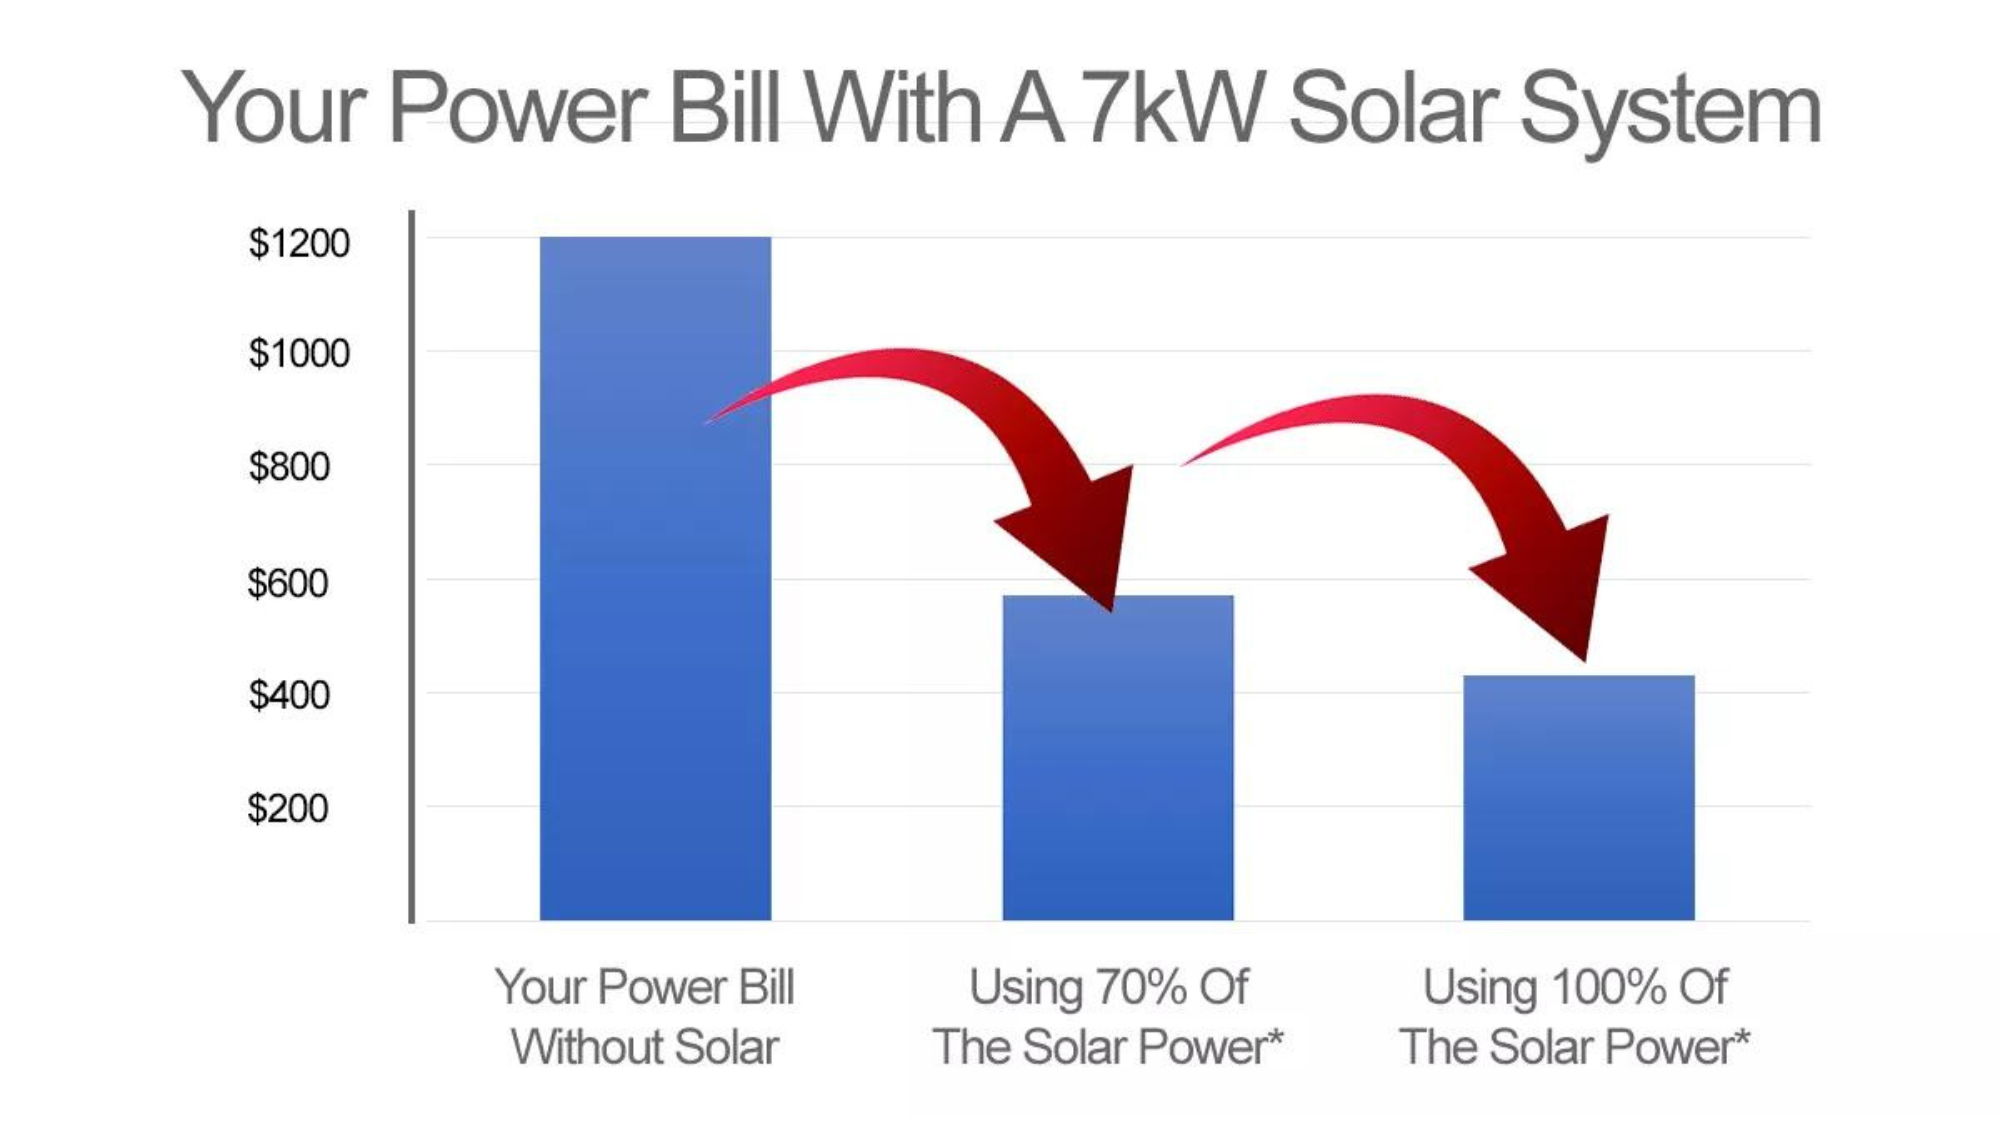 Power Bill With a 7kW Solar System